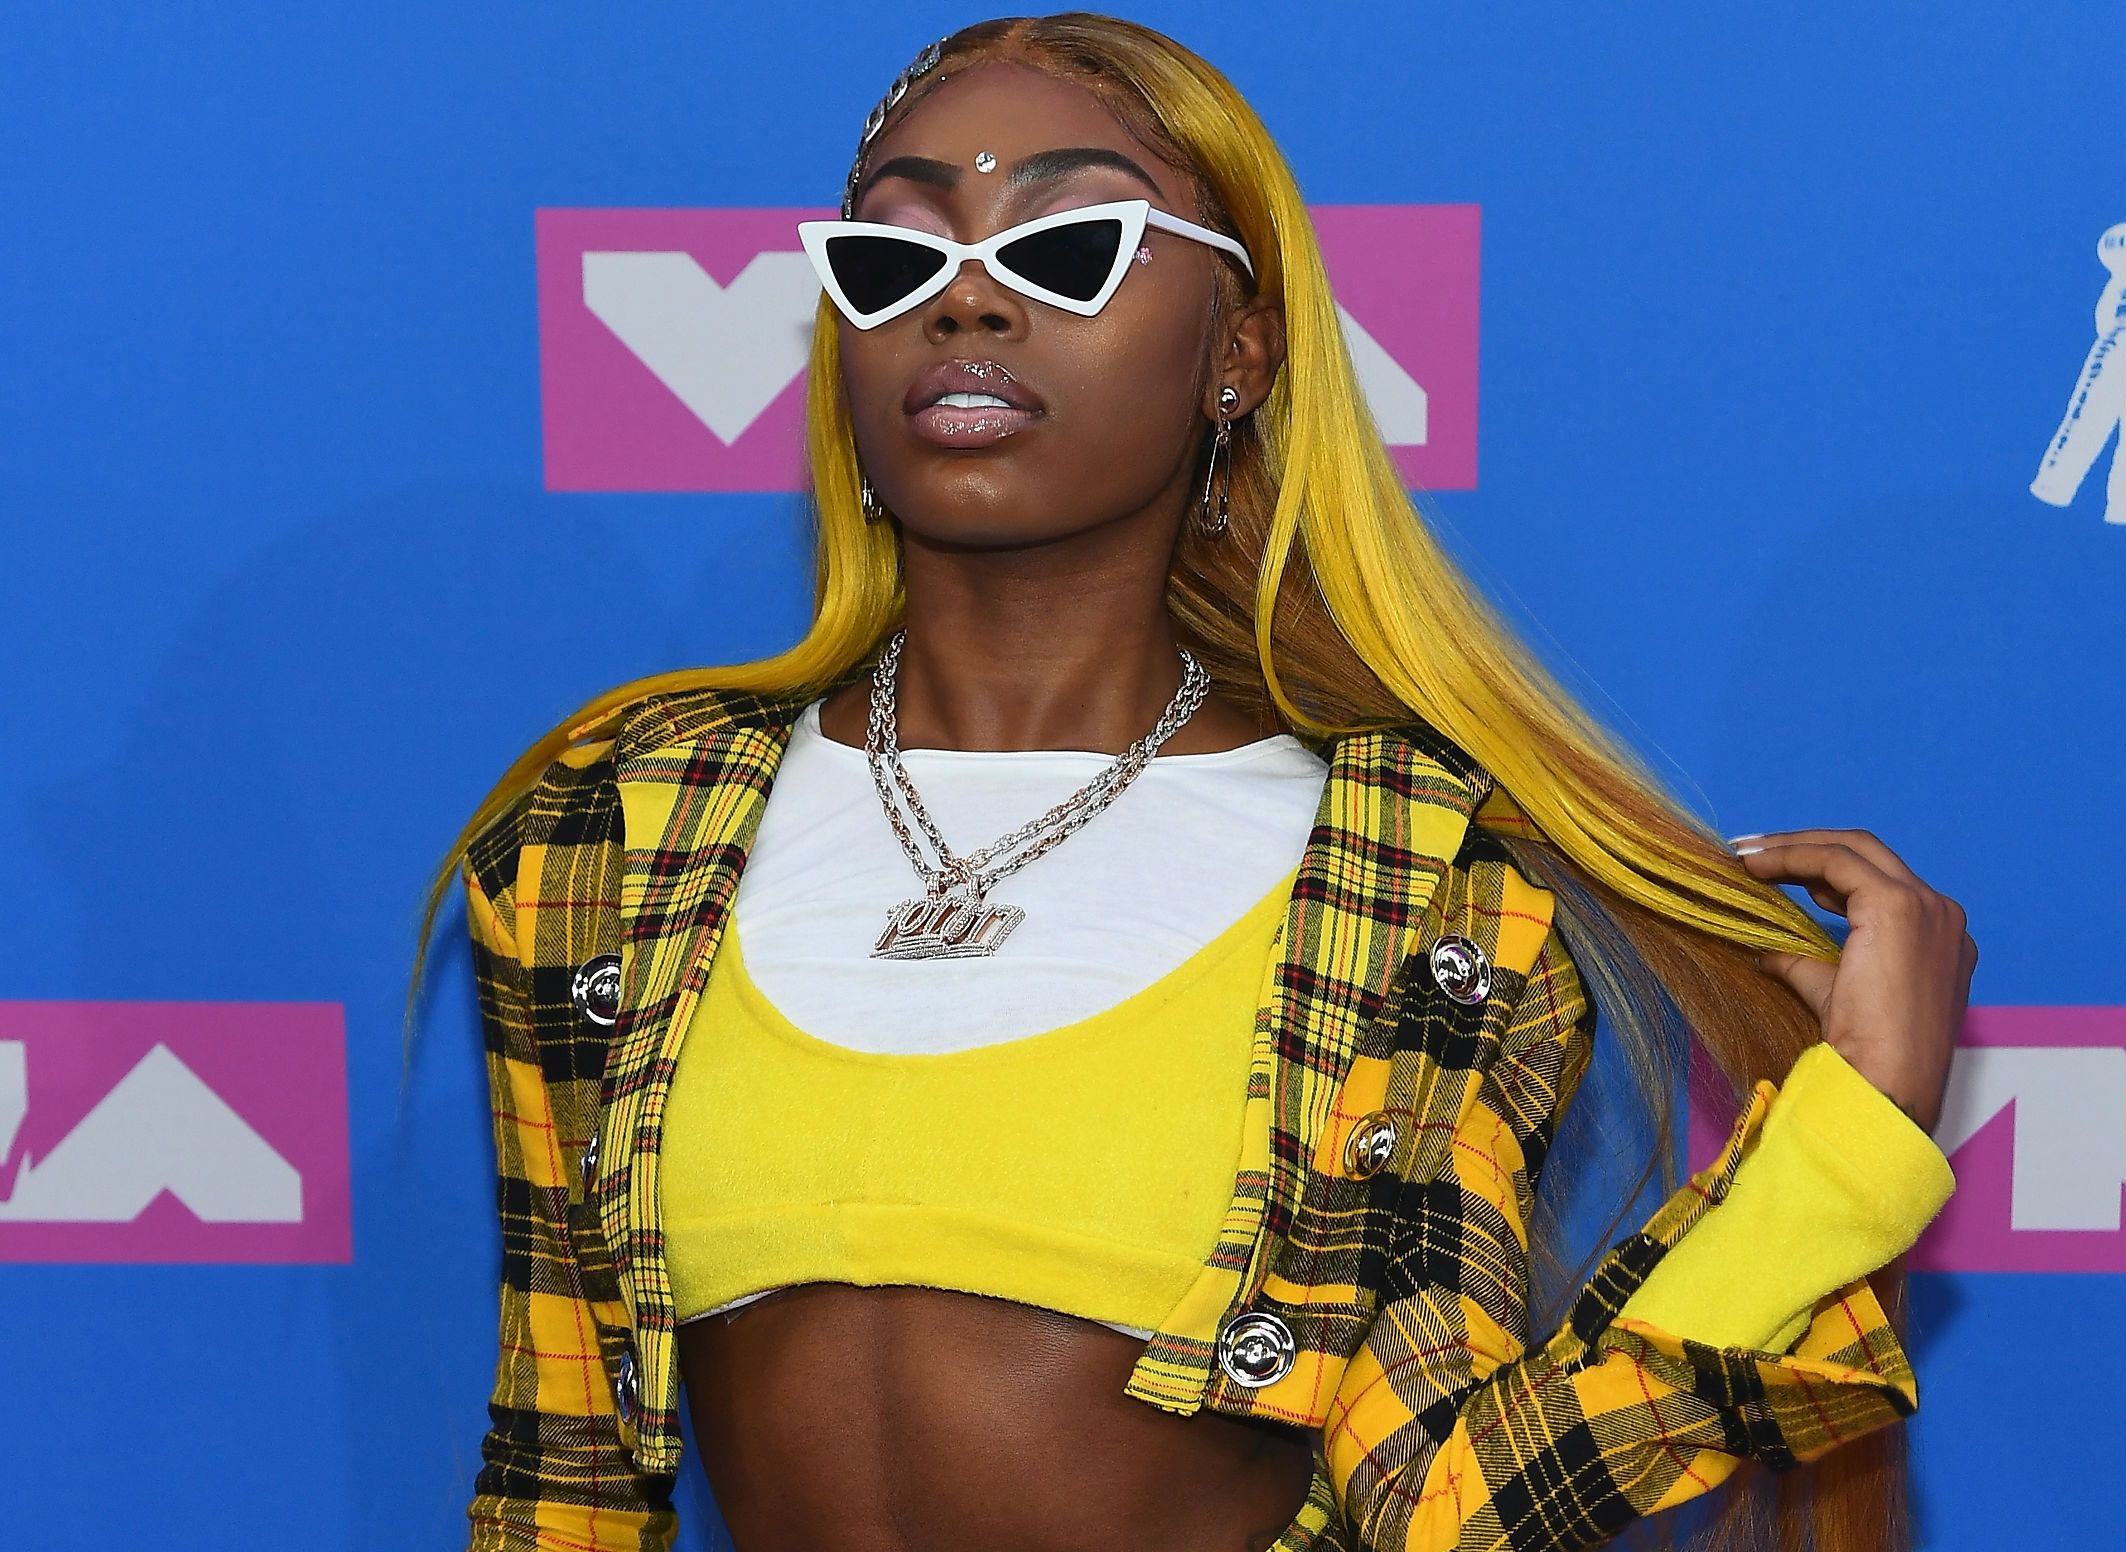 Asian Doll Opens Up About Working With Gucci Mane, Her New Album